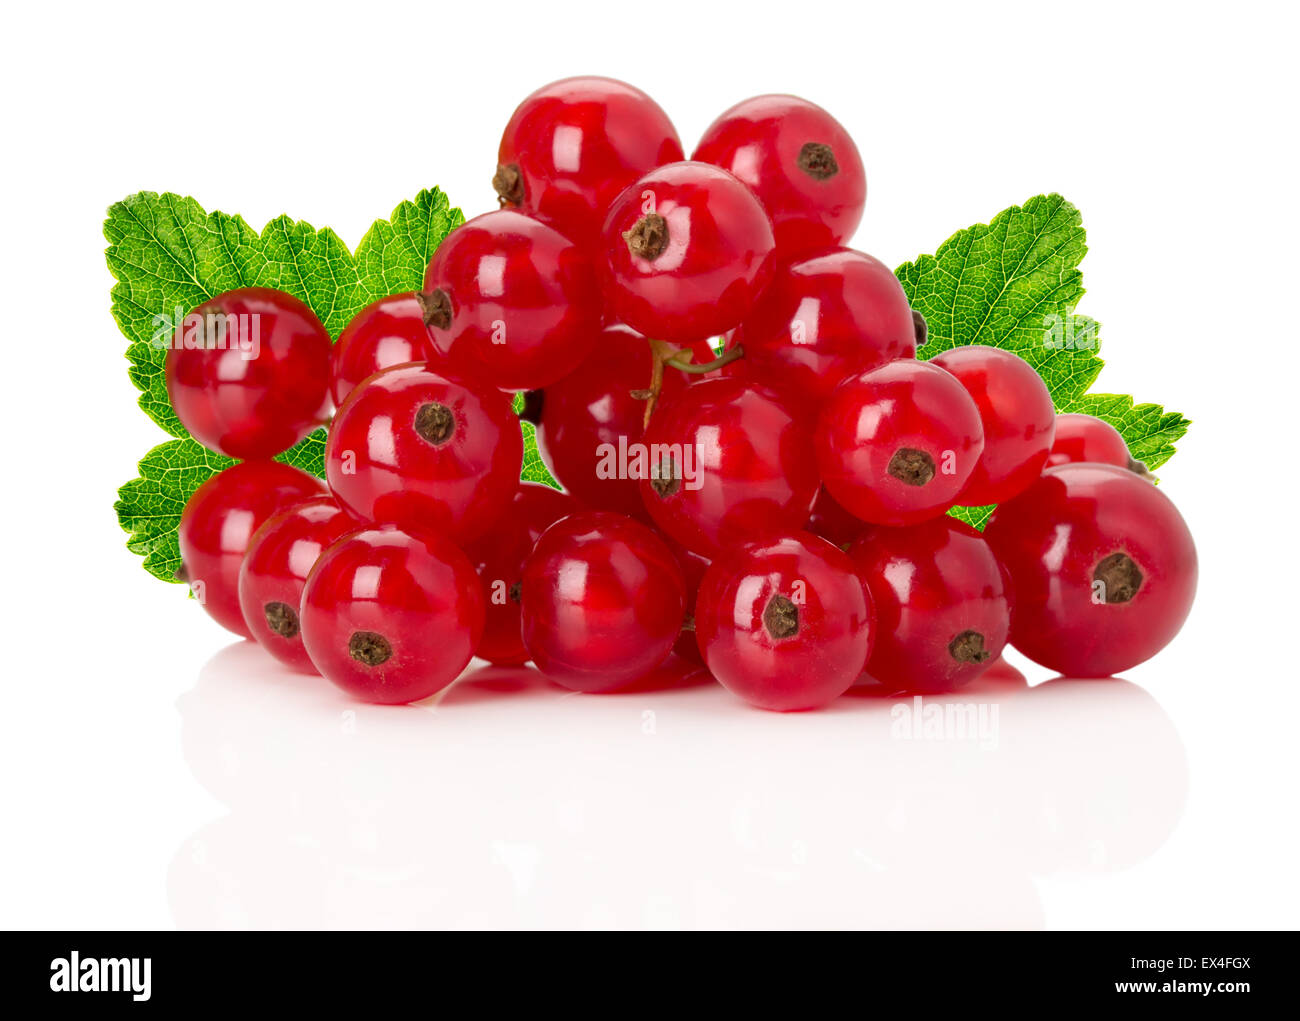 juicy ripe redcurrant on the white background. Stock Photo